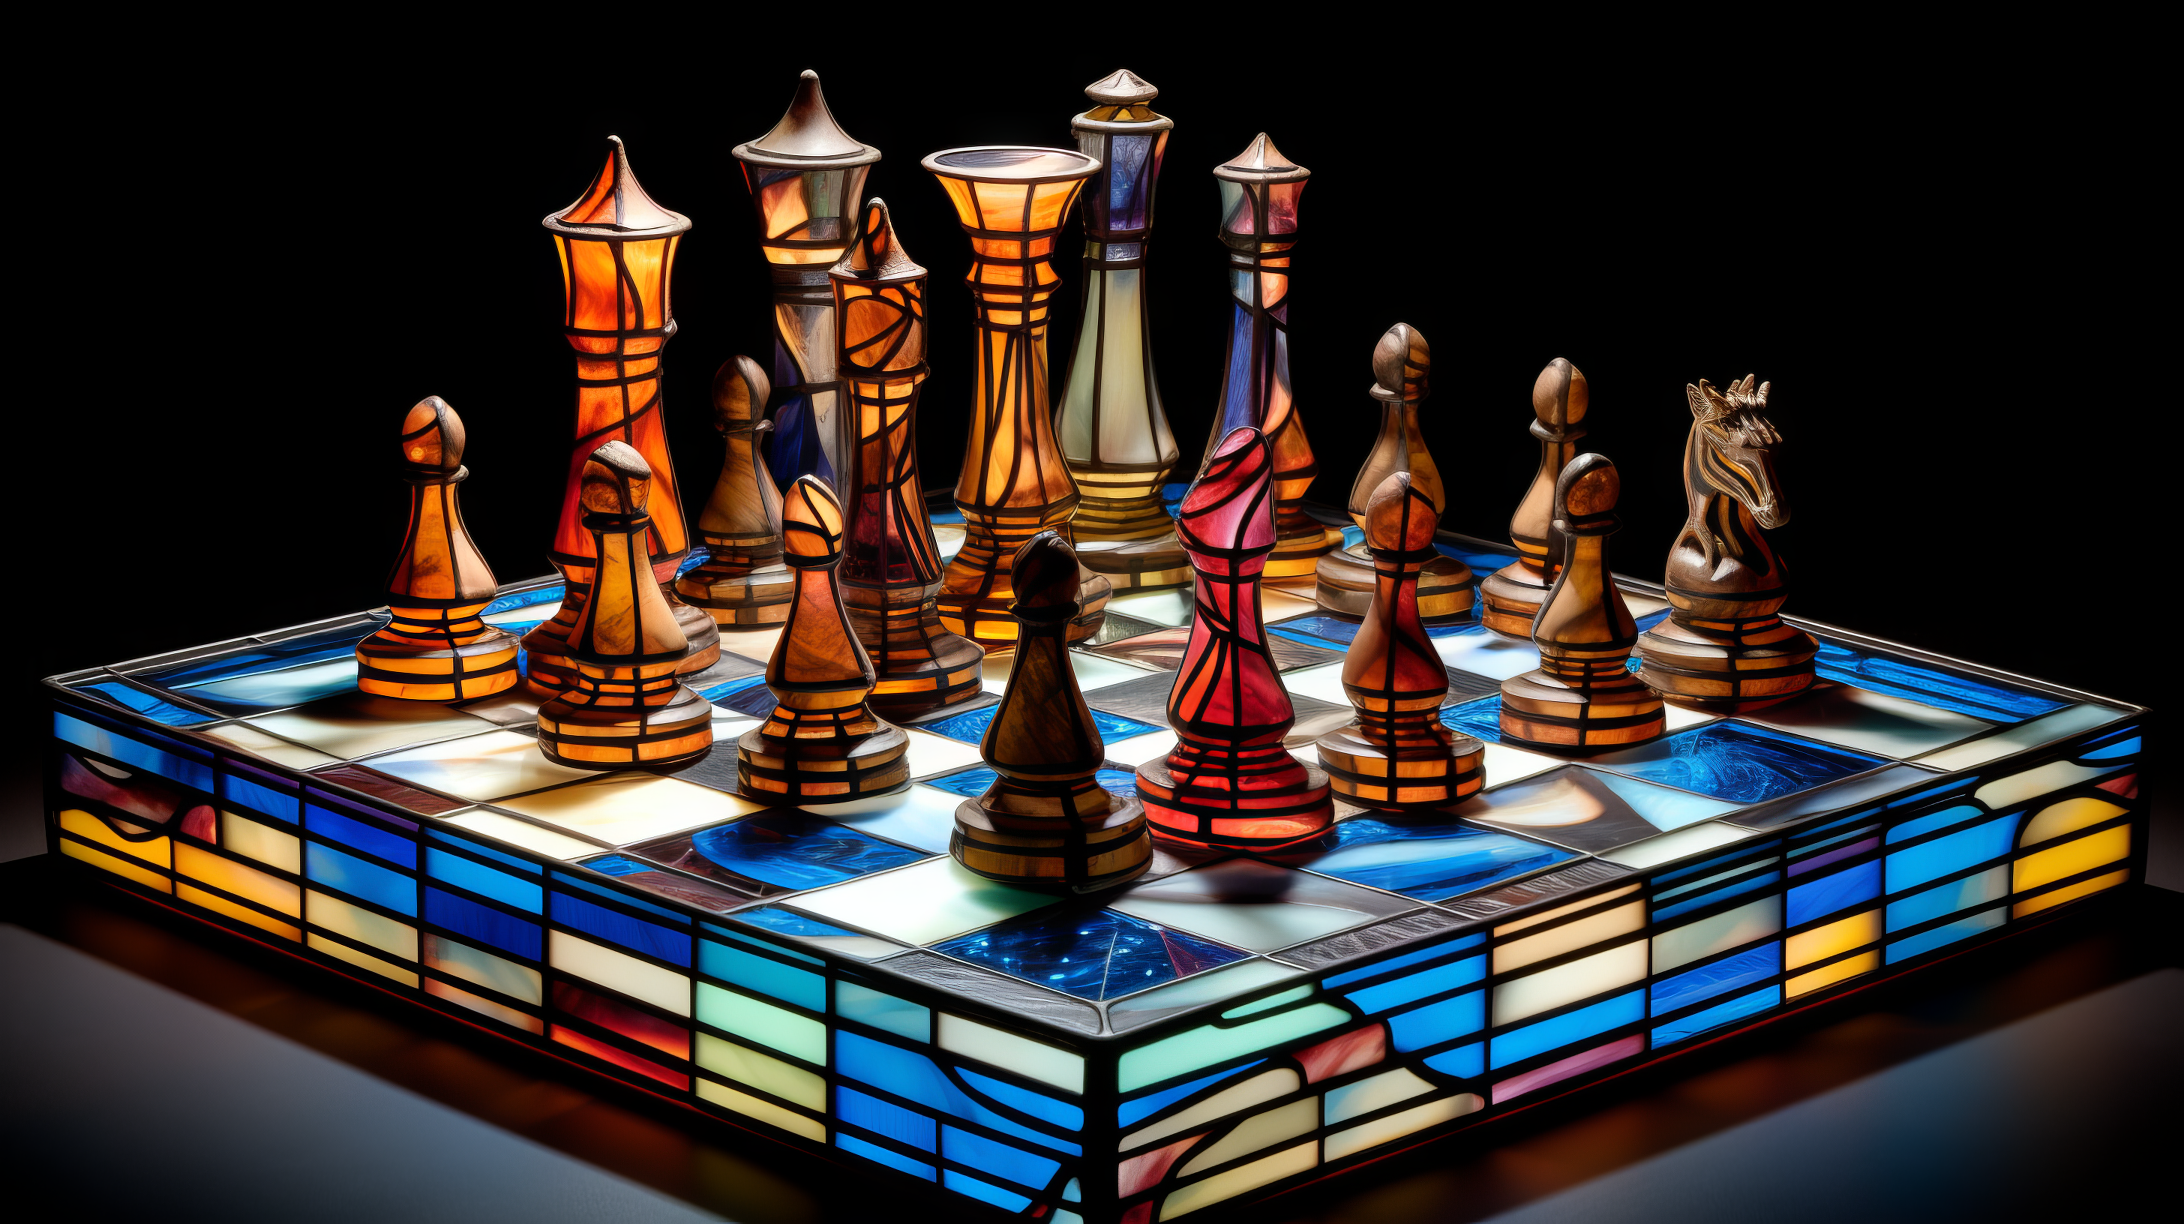 Chess wallpapers hd, desktop backgrounds, images and pictures